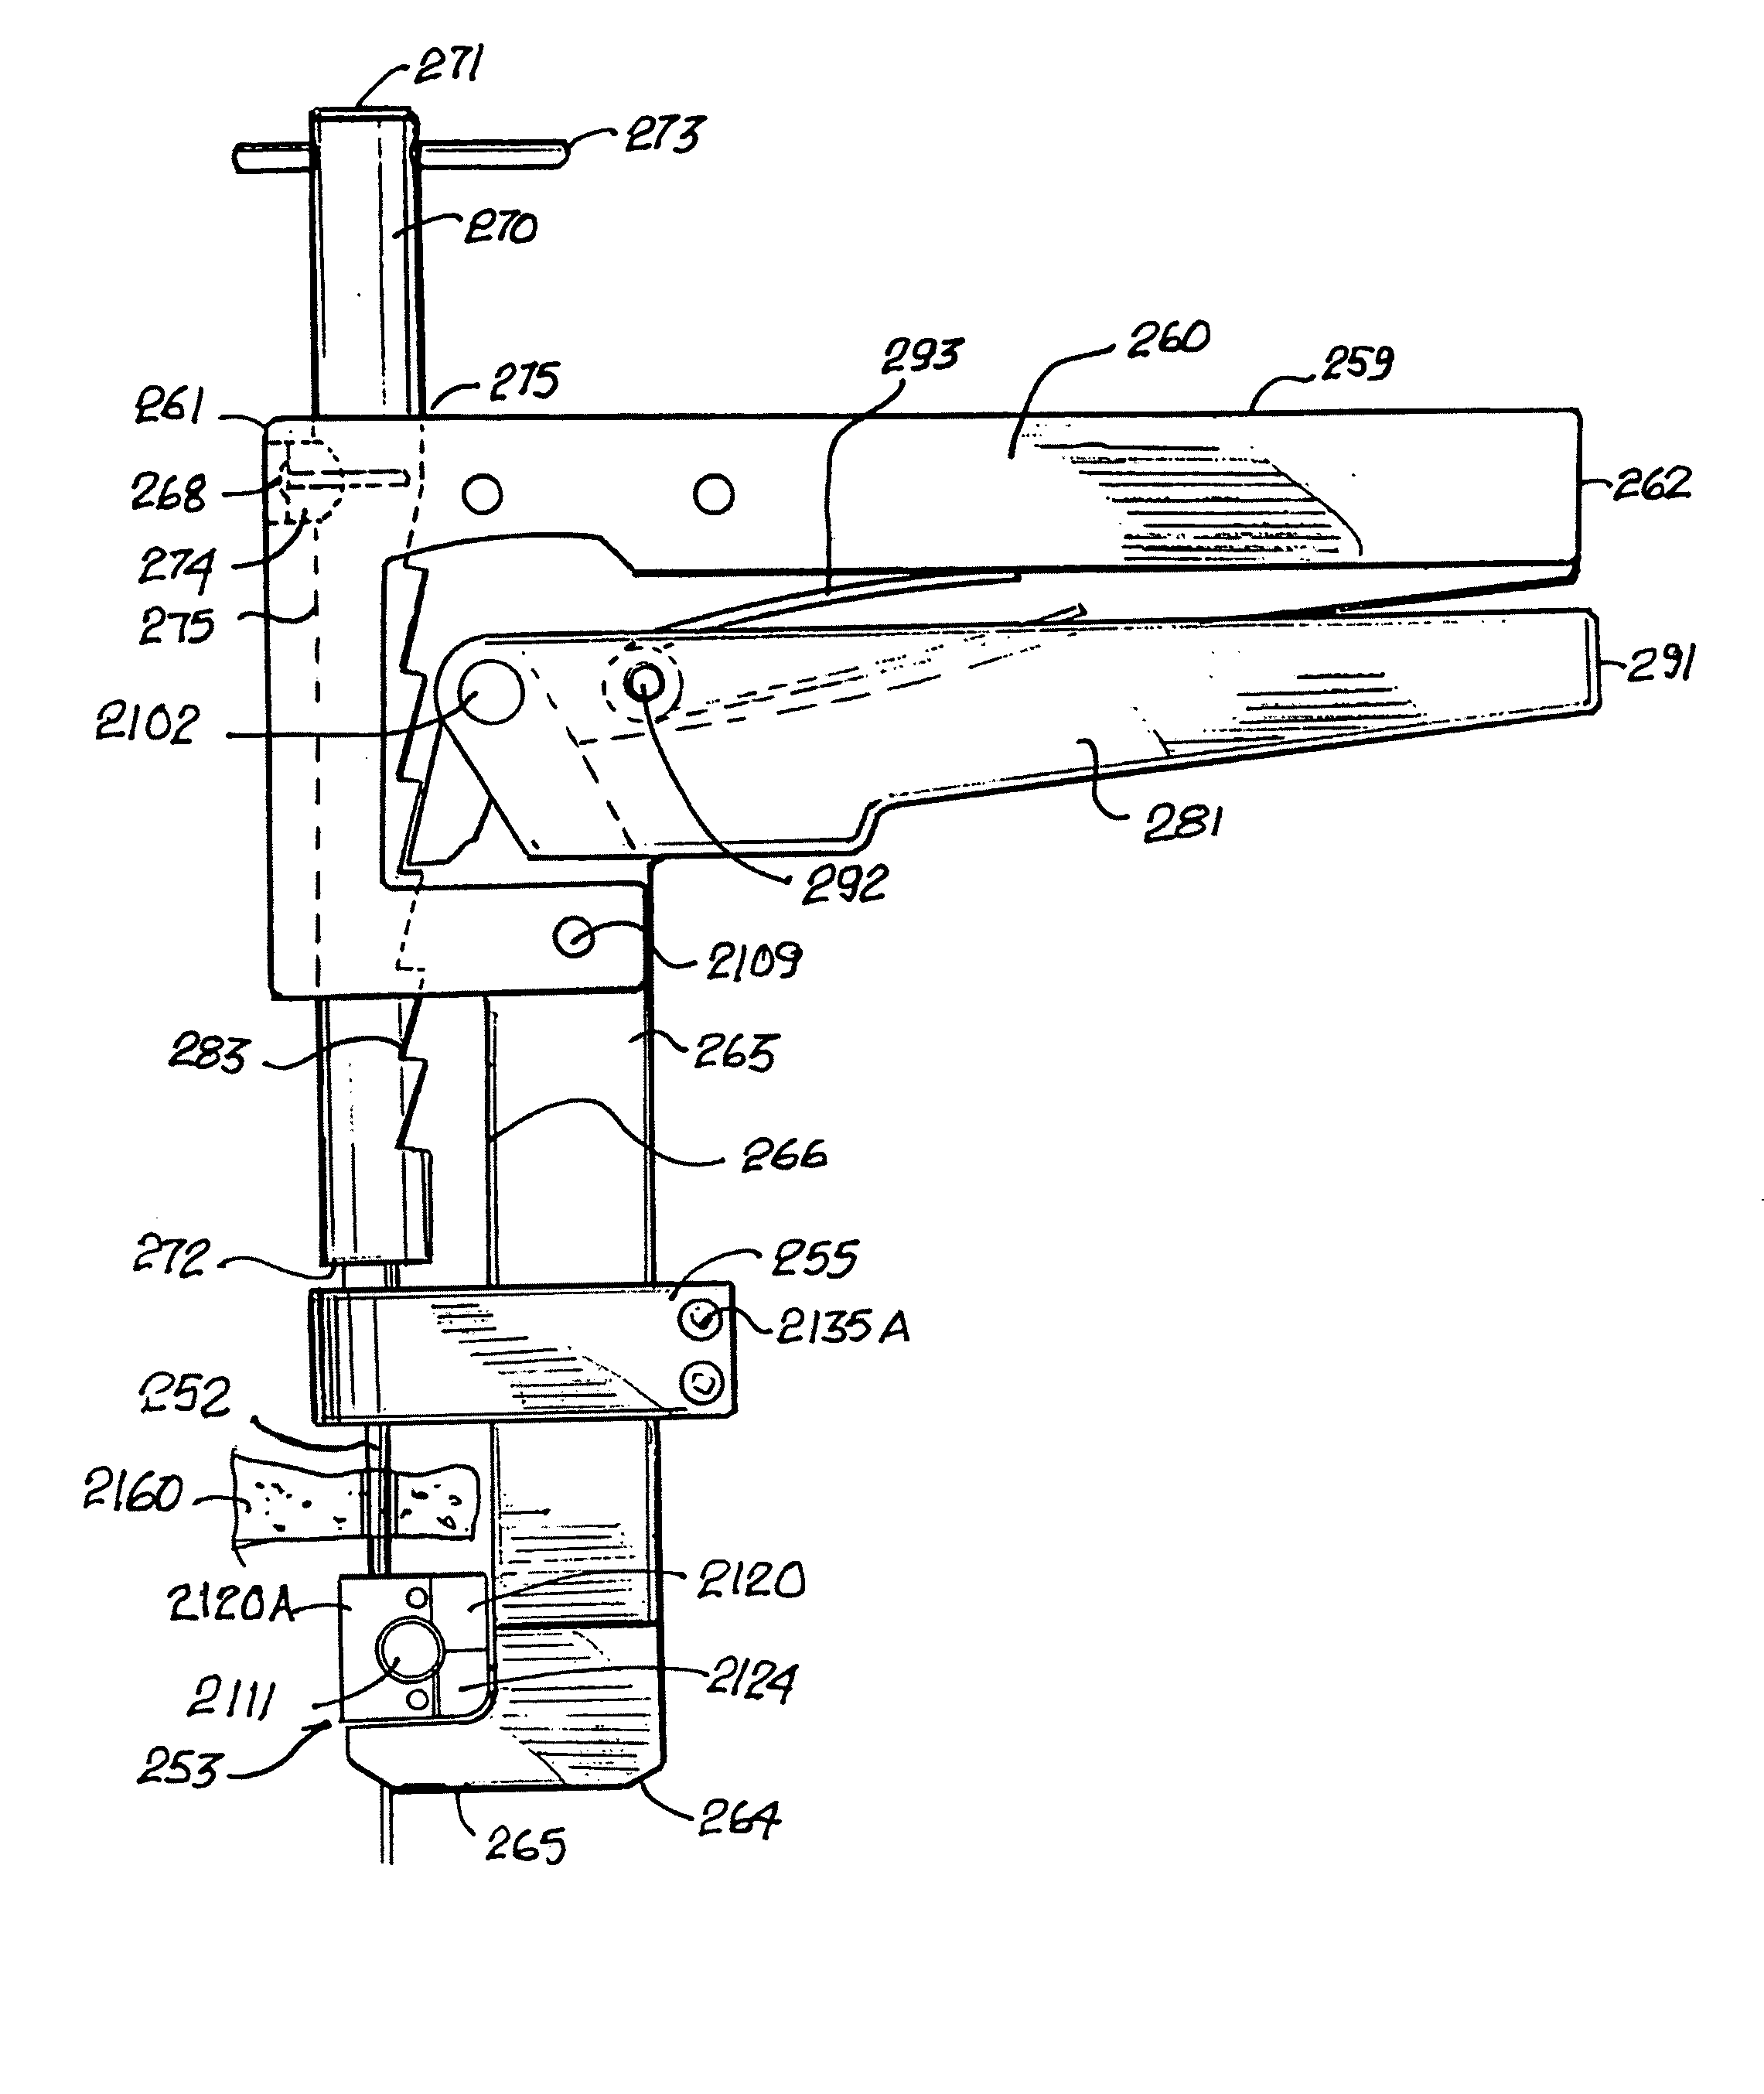 Suture apparatus and method for sternal closure